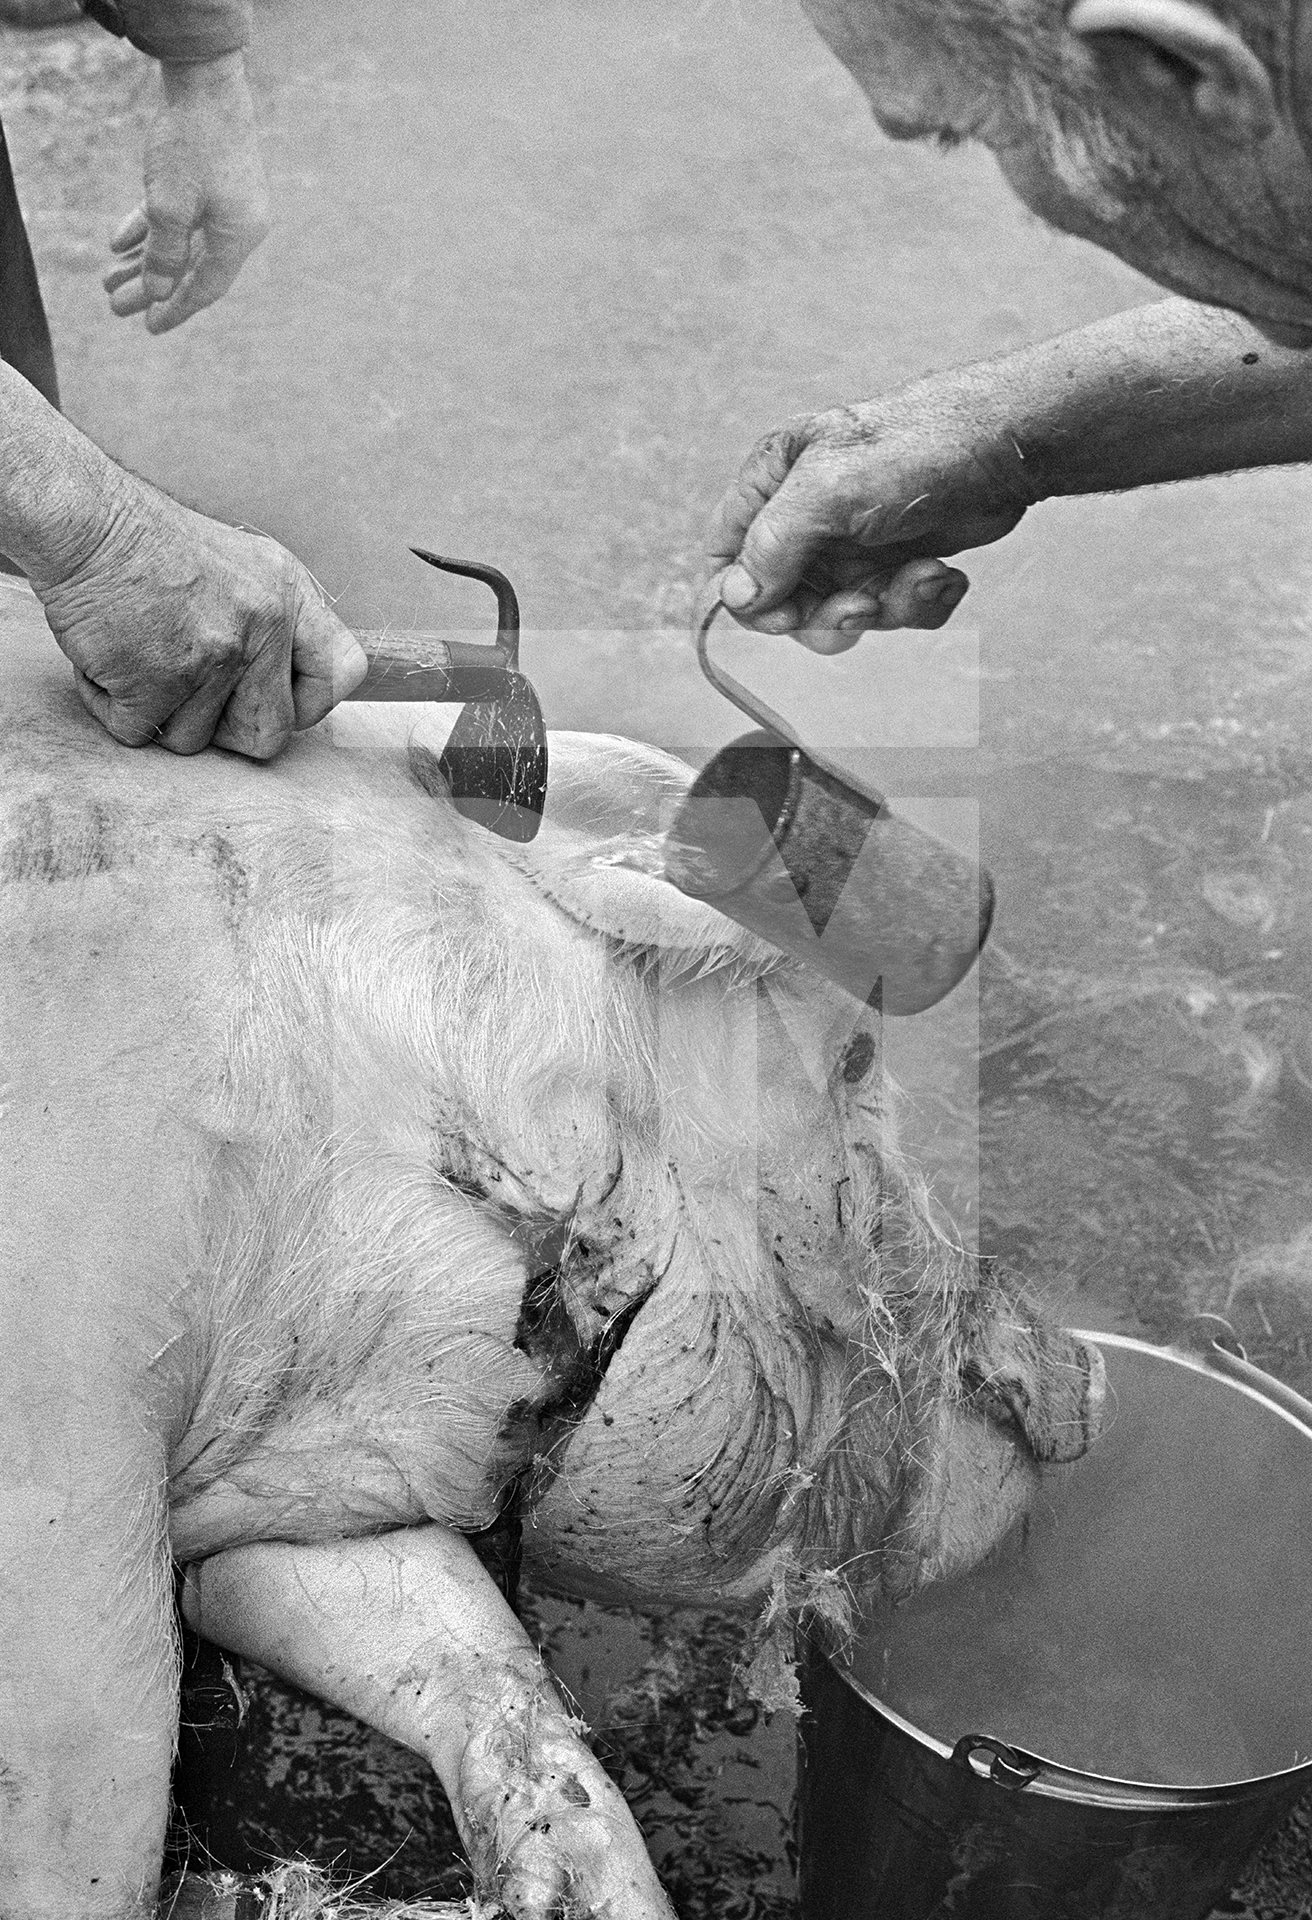 Boiling water is ladled onto the flesh and the pig shaved. North Yorkshire 1976 by Daniel Meadows